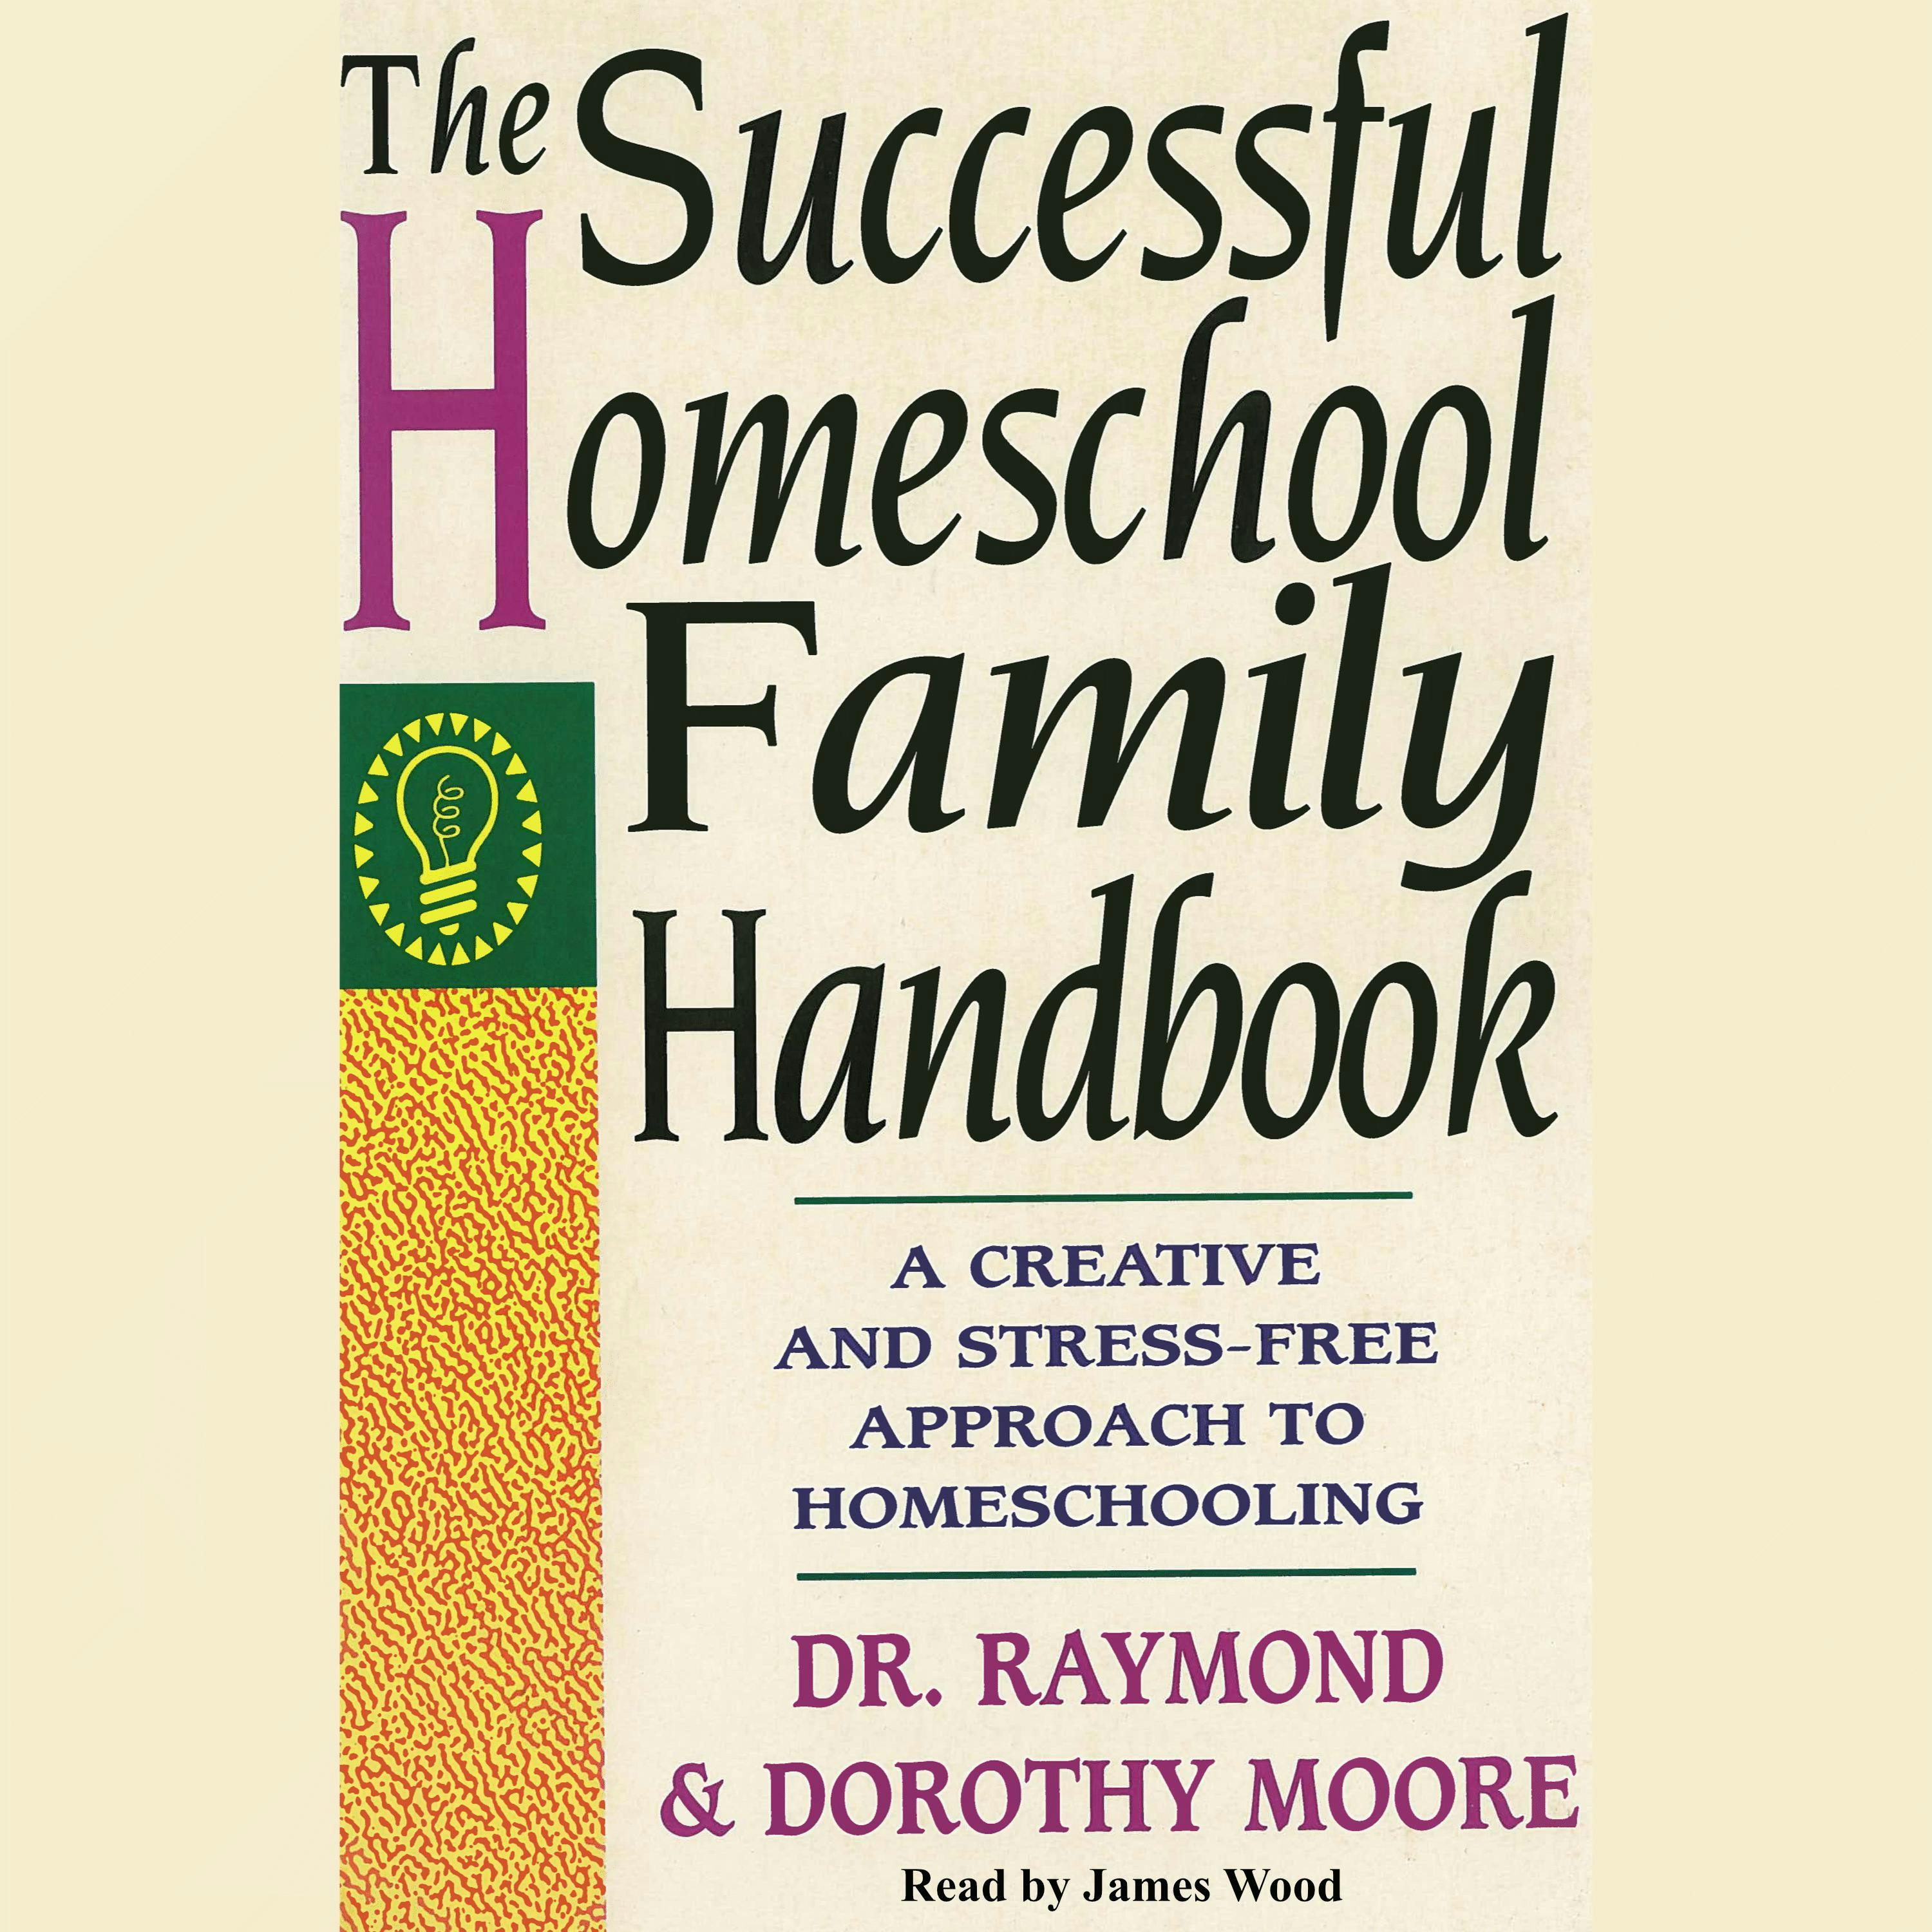 The Successful Homeschool Family Handbook: A Creative and Stress-Free Approach to Homeschooling. - Raymond S. Moore, Dorothy N. Moore